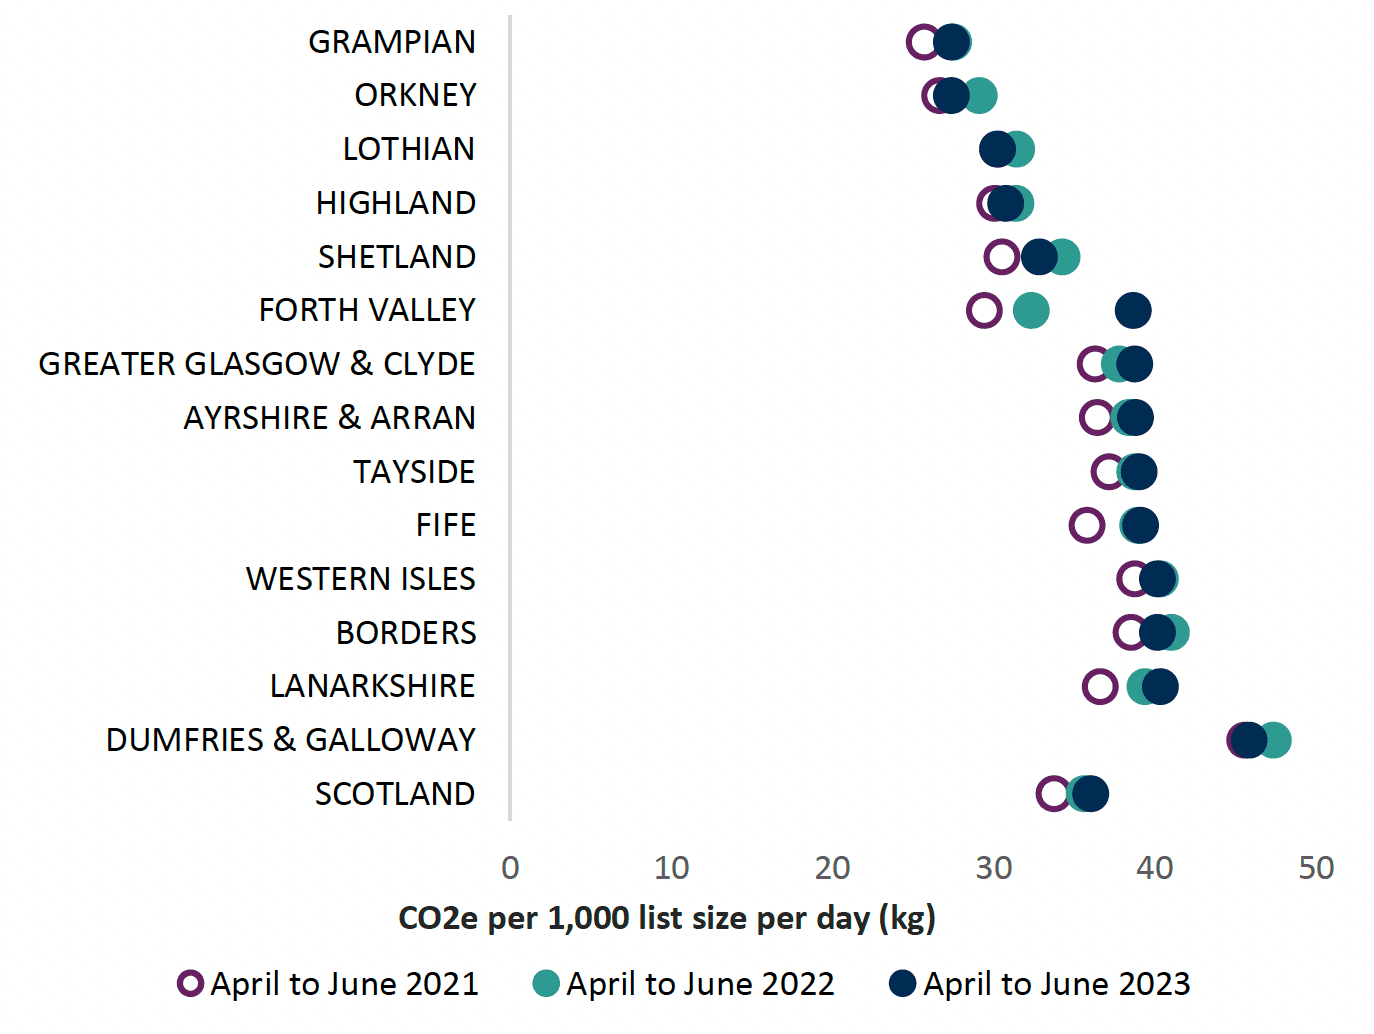 Chart showing variance in carbon emissions across all health boards and Scotland from 2021 to 2023 indicating target reductions for net zero. Overall Scotland trend is fairly static